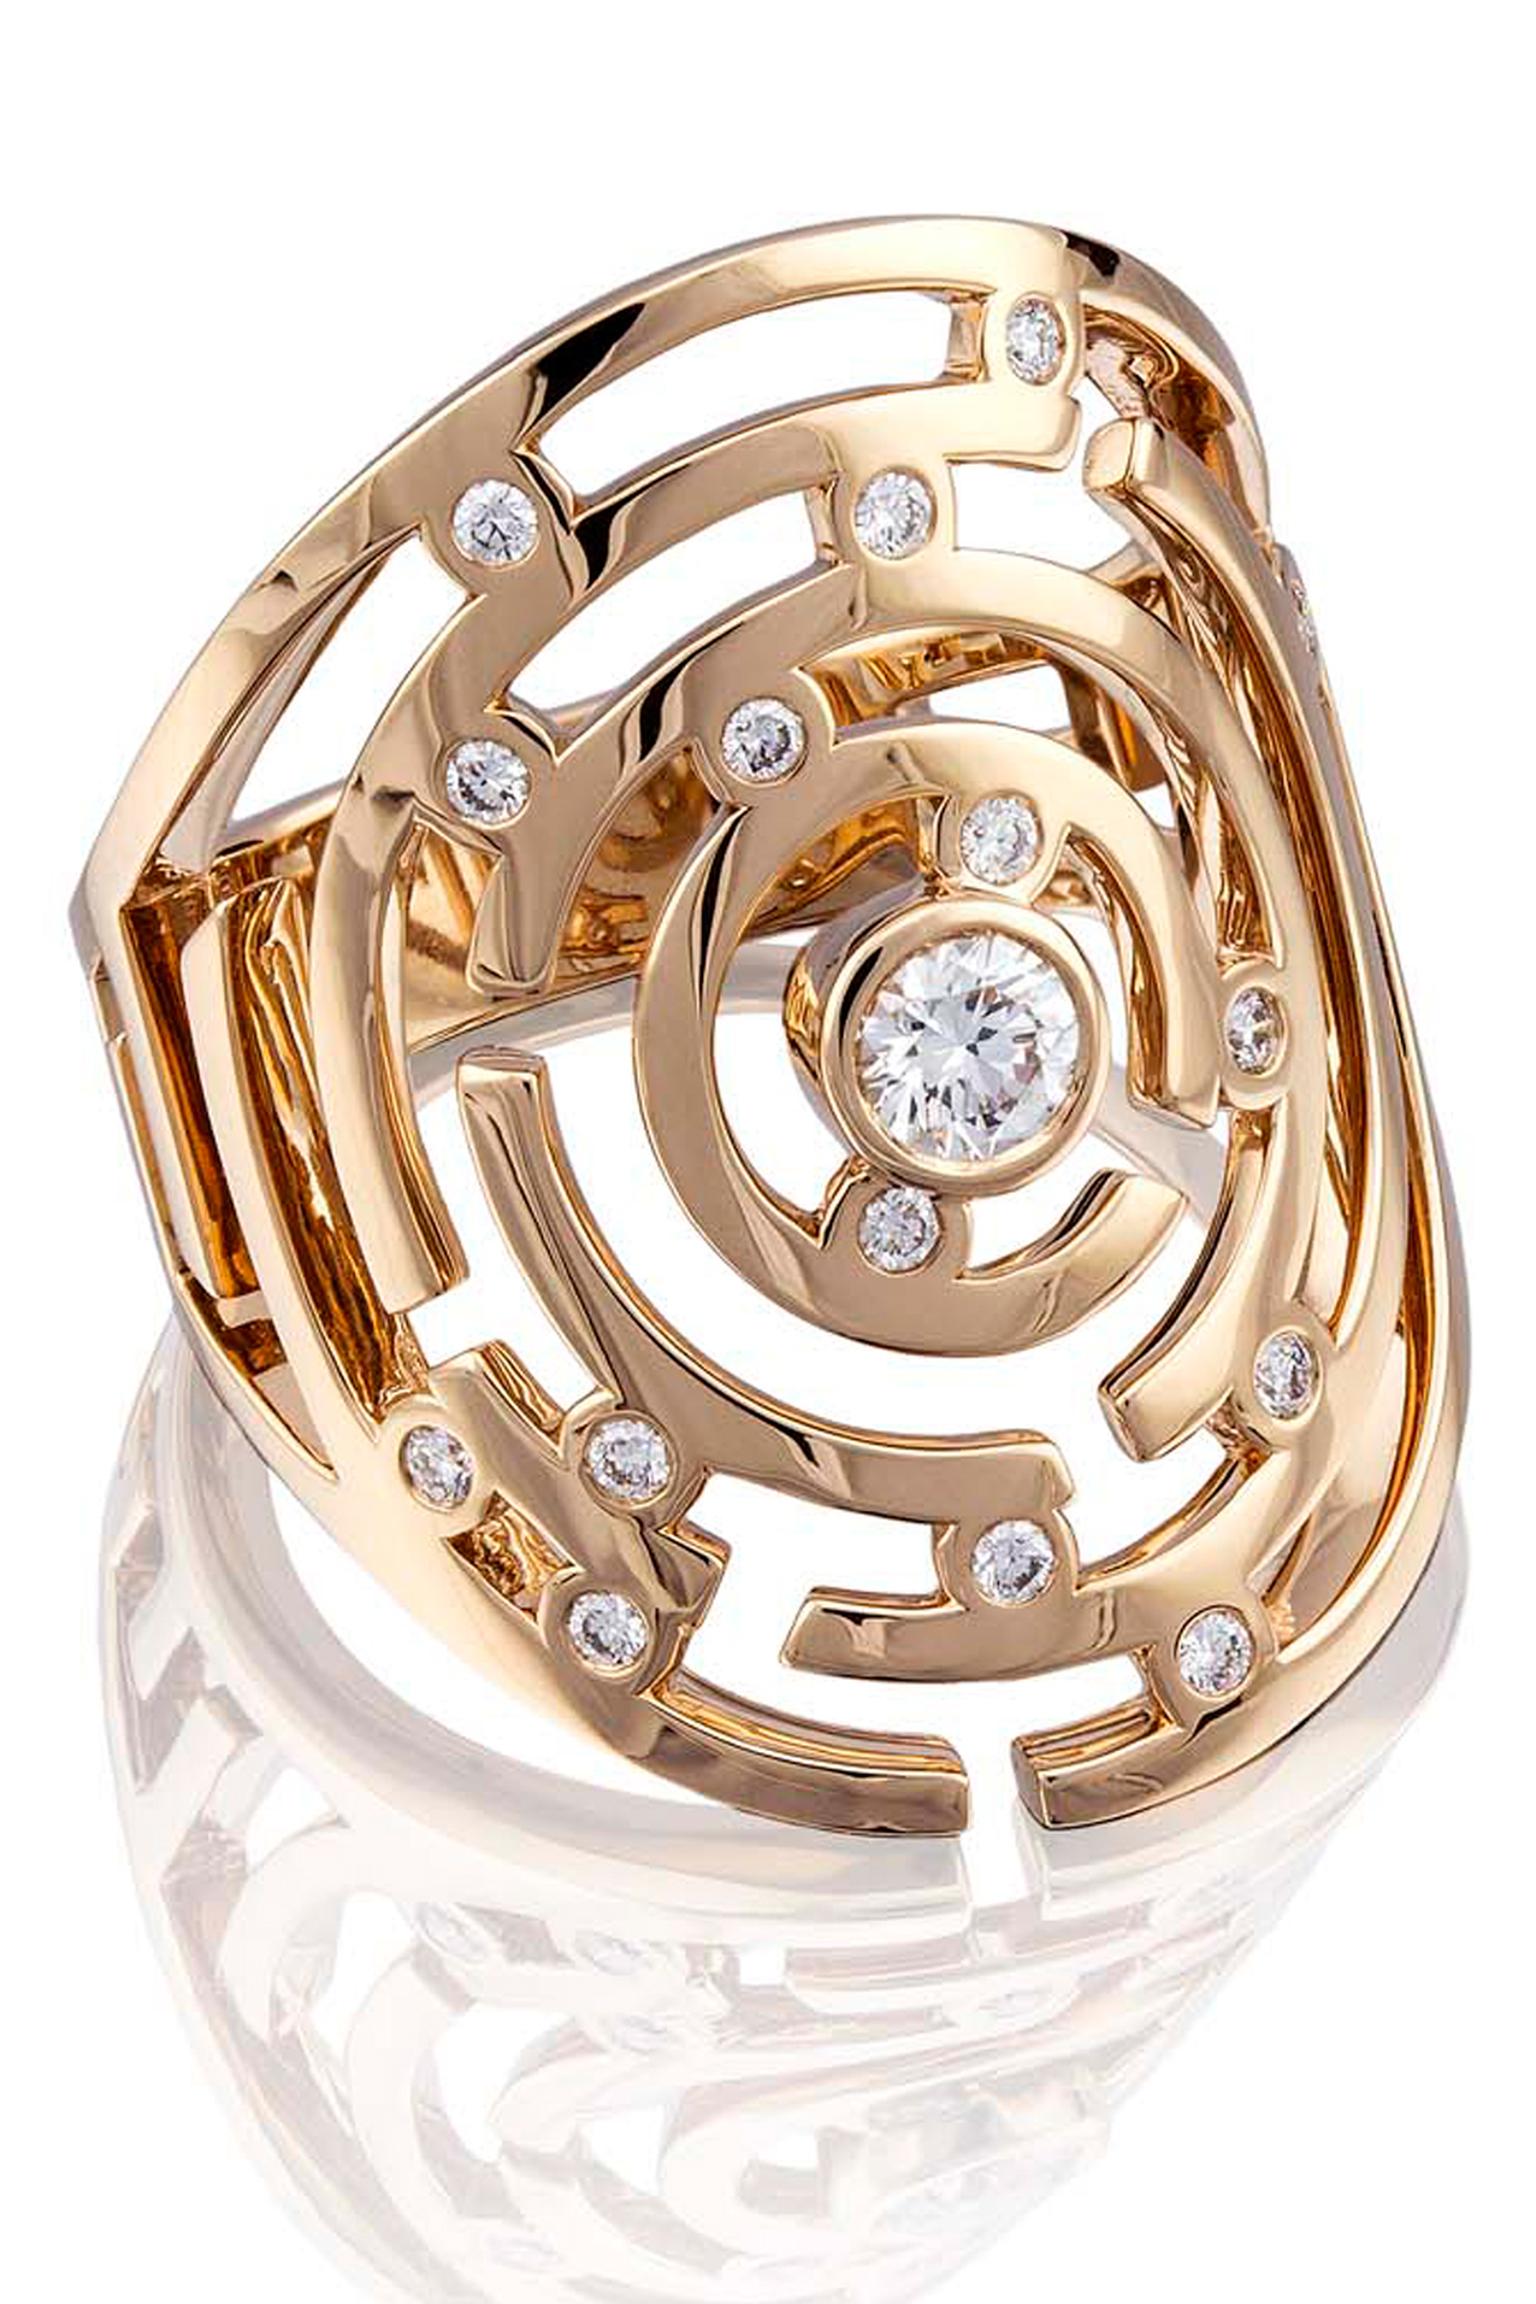 Boodles Maze collection large diamond ring in rose gold.